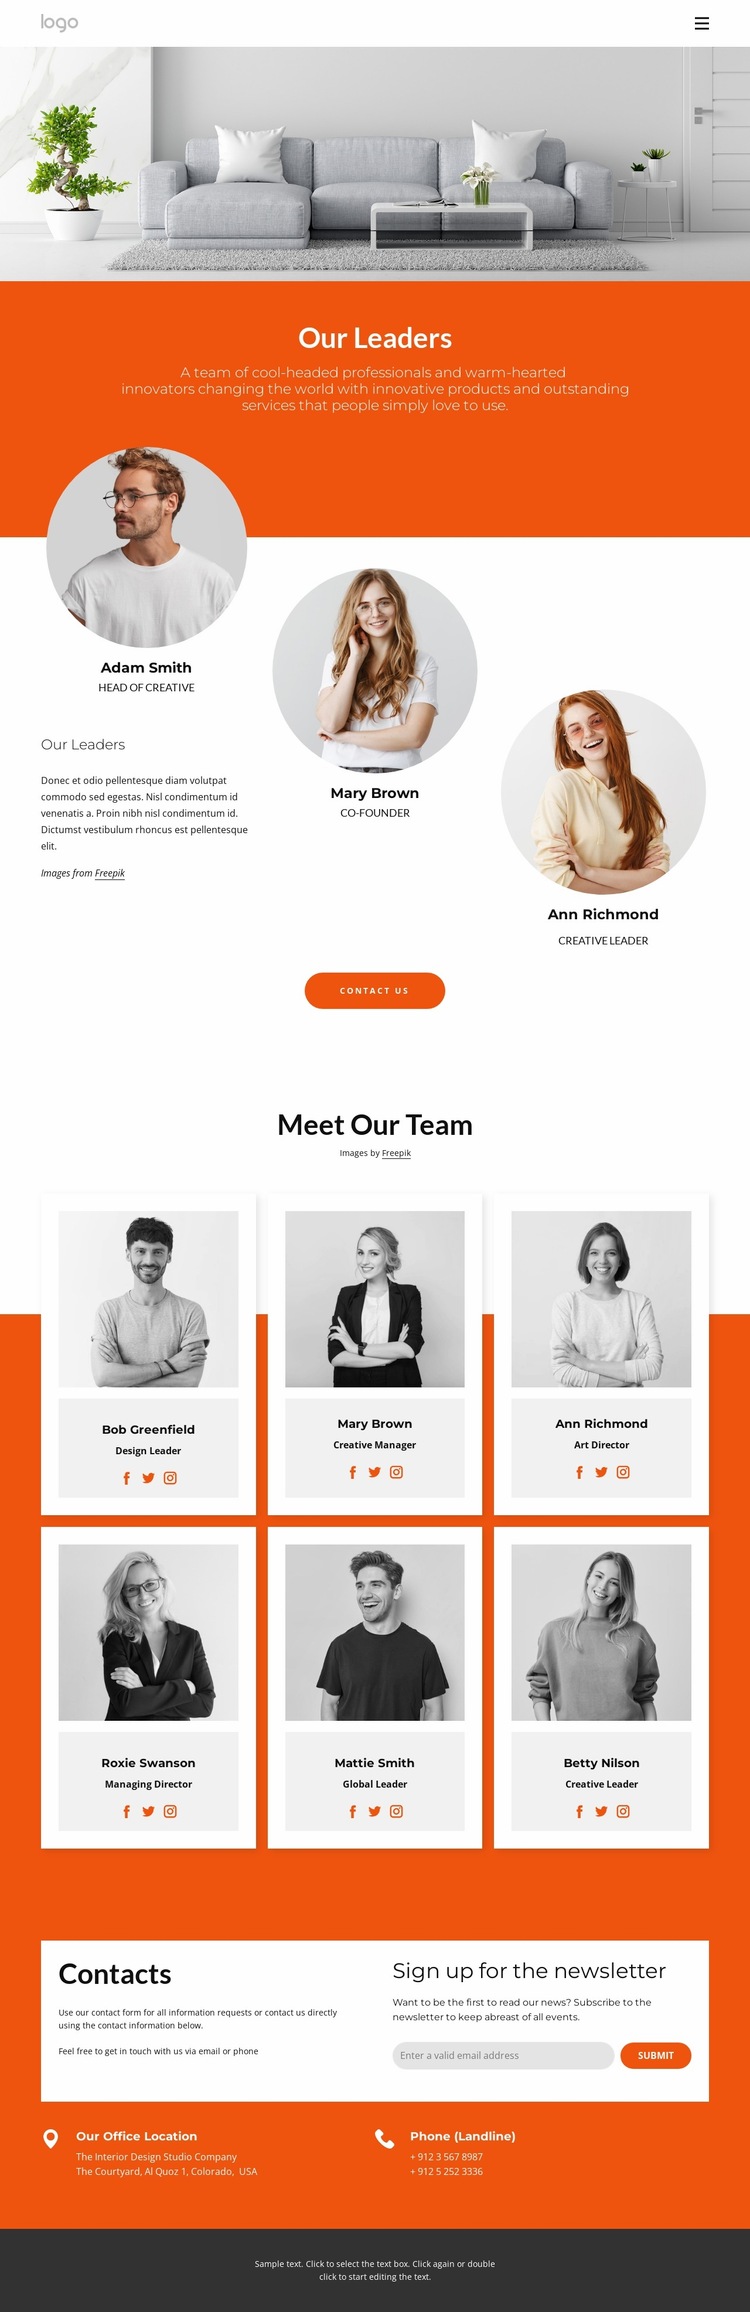 Our great team Website Builder Templates